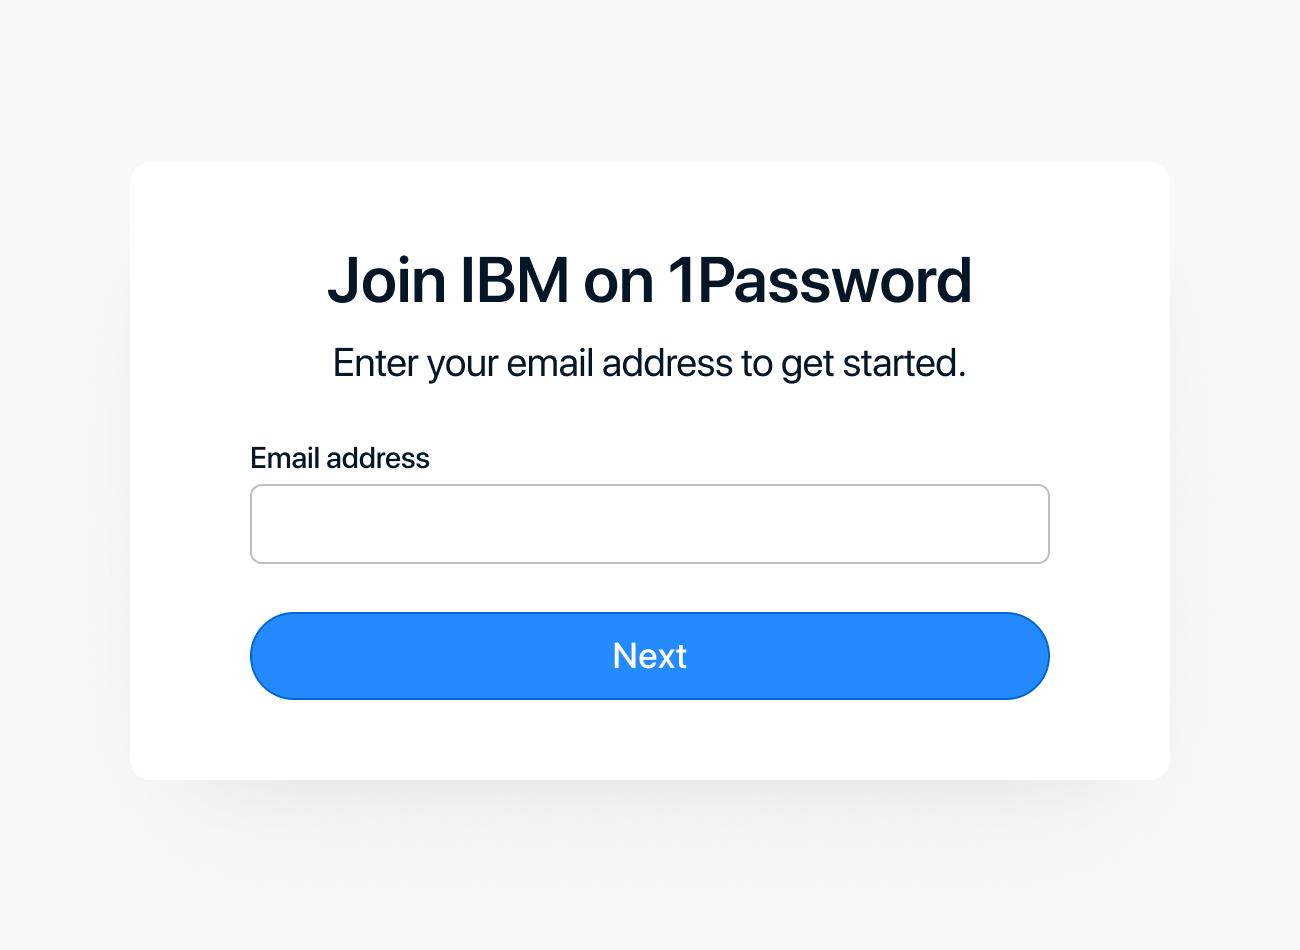 Enter your IBM email address to receive an invitation for 1Password